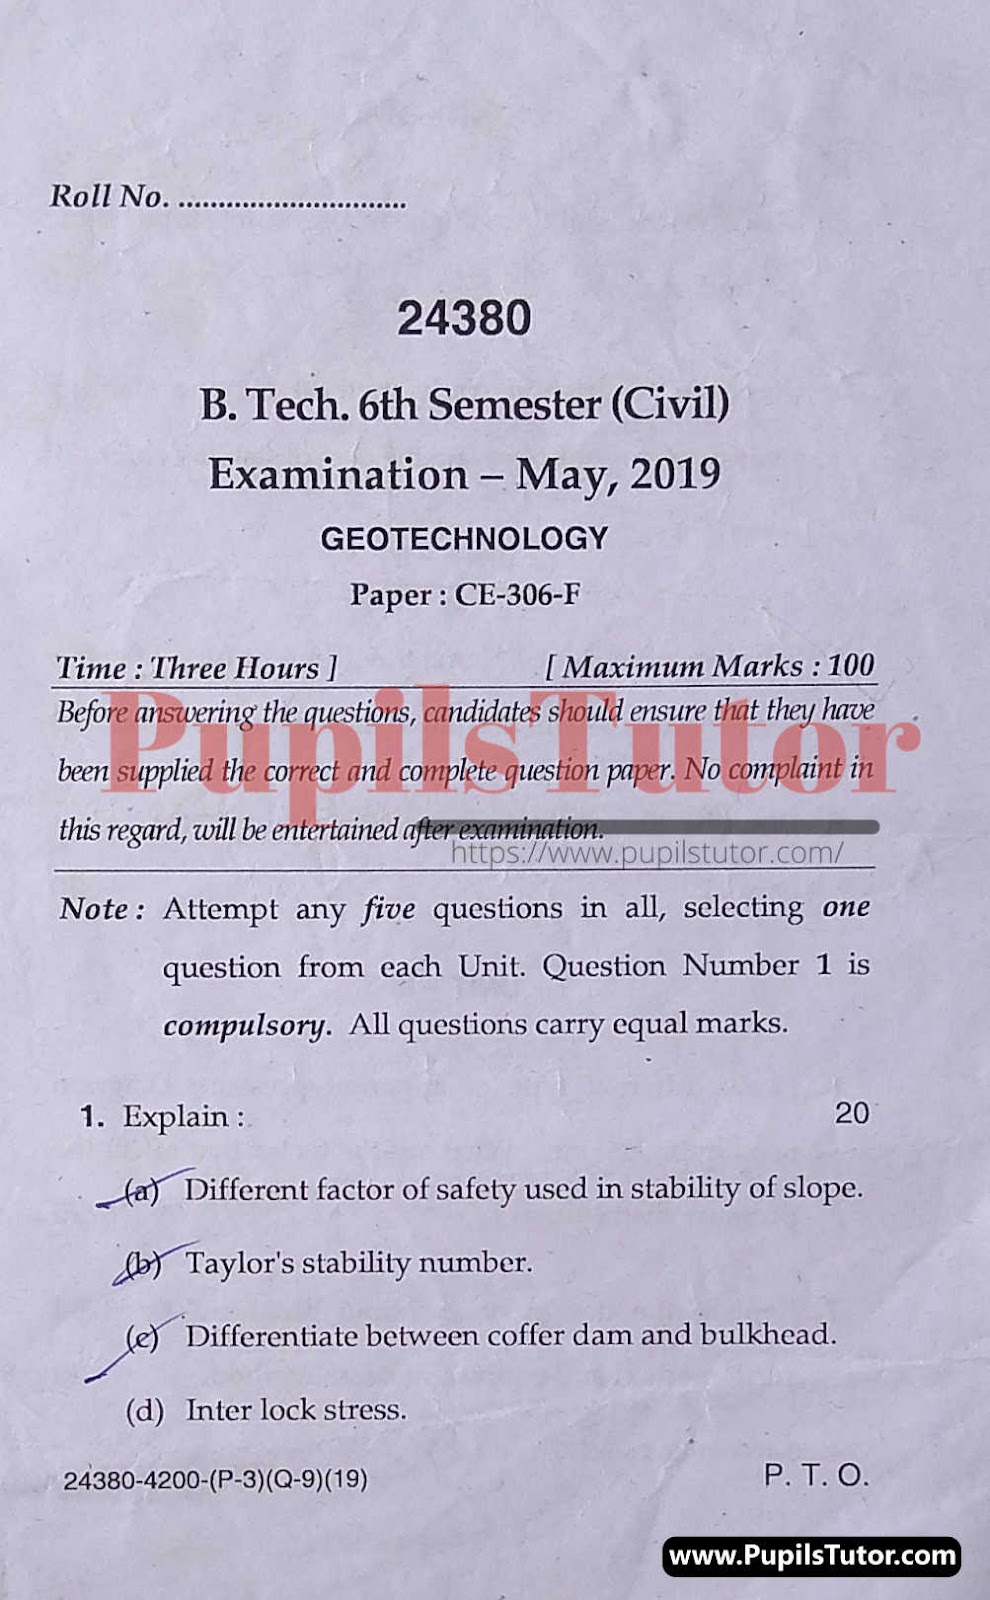 MDU (Maharshi Dayanand University, Rohtak Haryana) Btech Regular Exam Sixth Semester Previous Year Geotechnology Question Paper For May, 2019 Exam (Question Paper Page 1) - pupilstutor.com